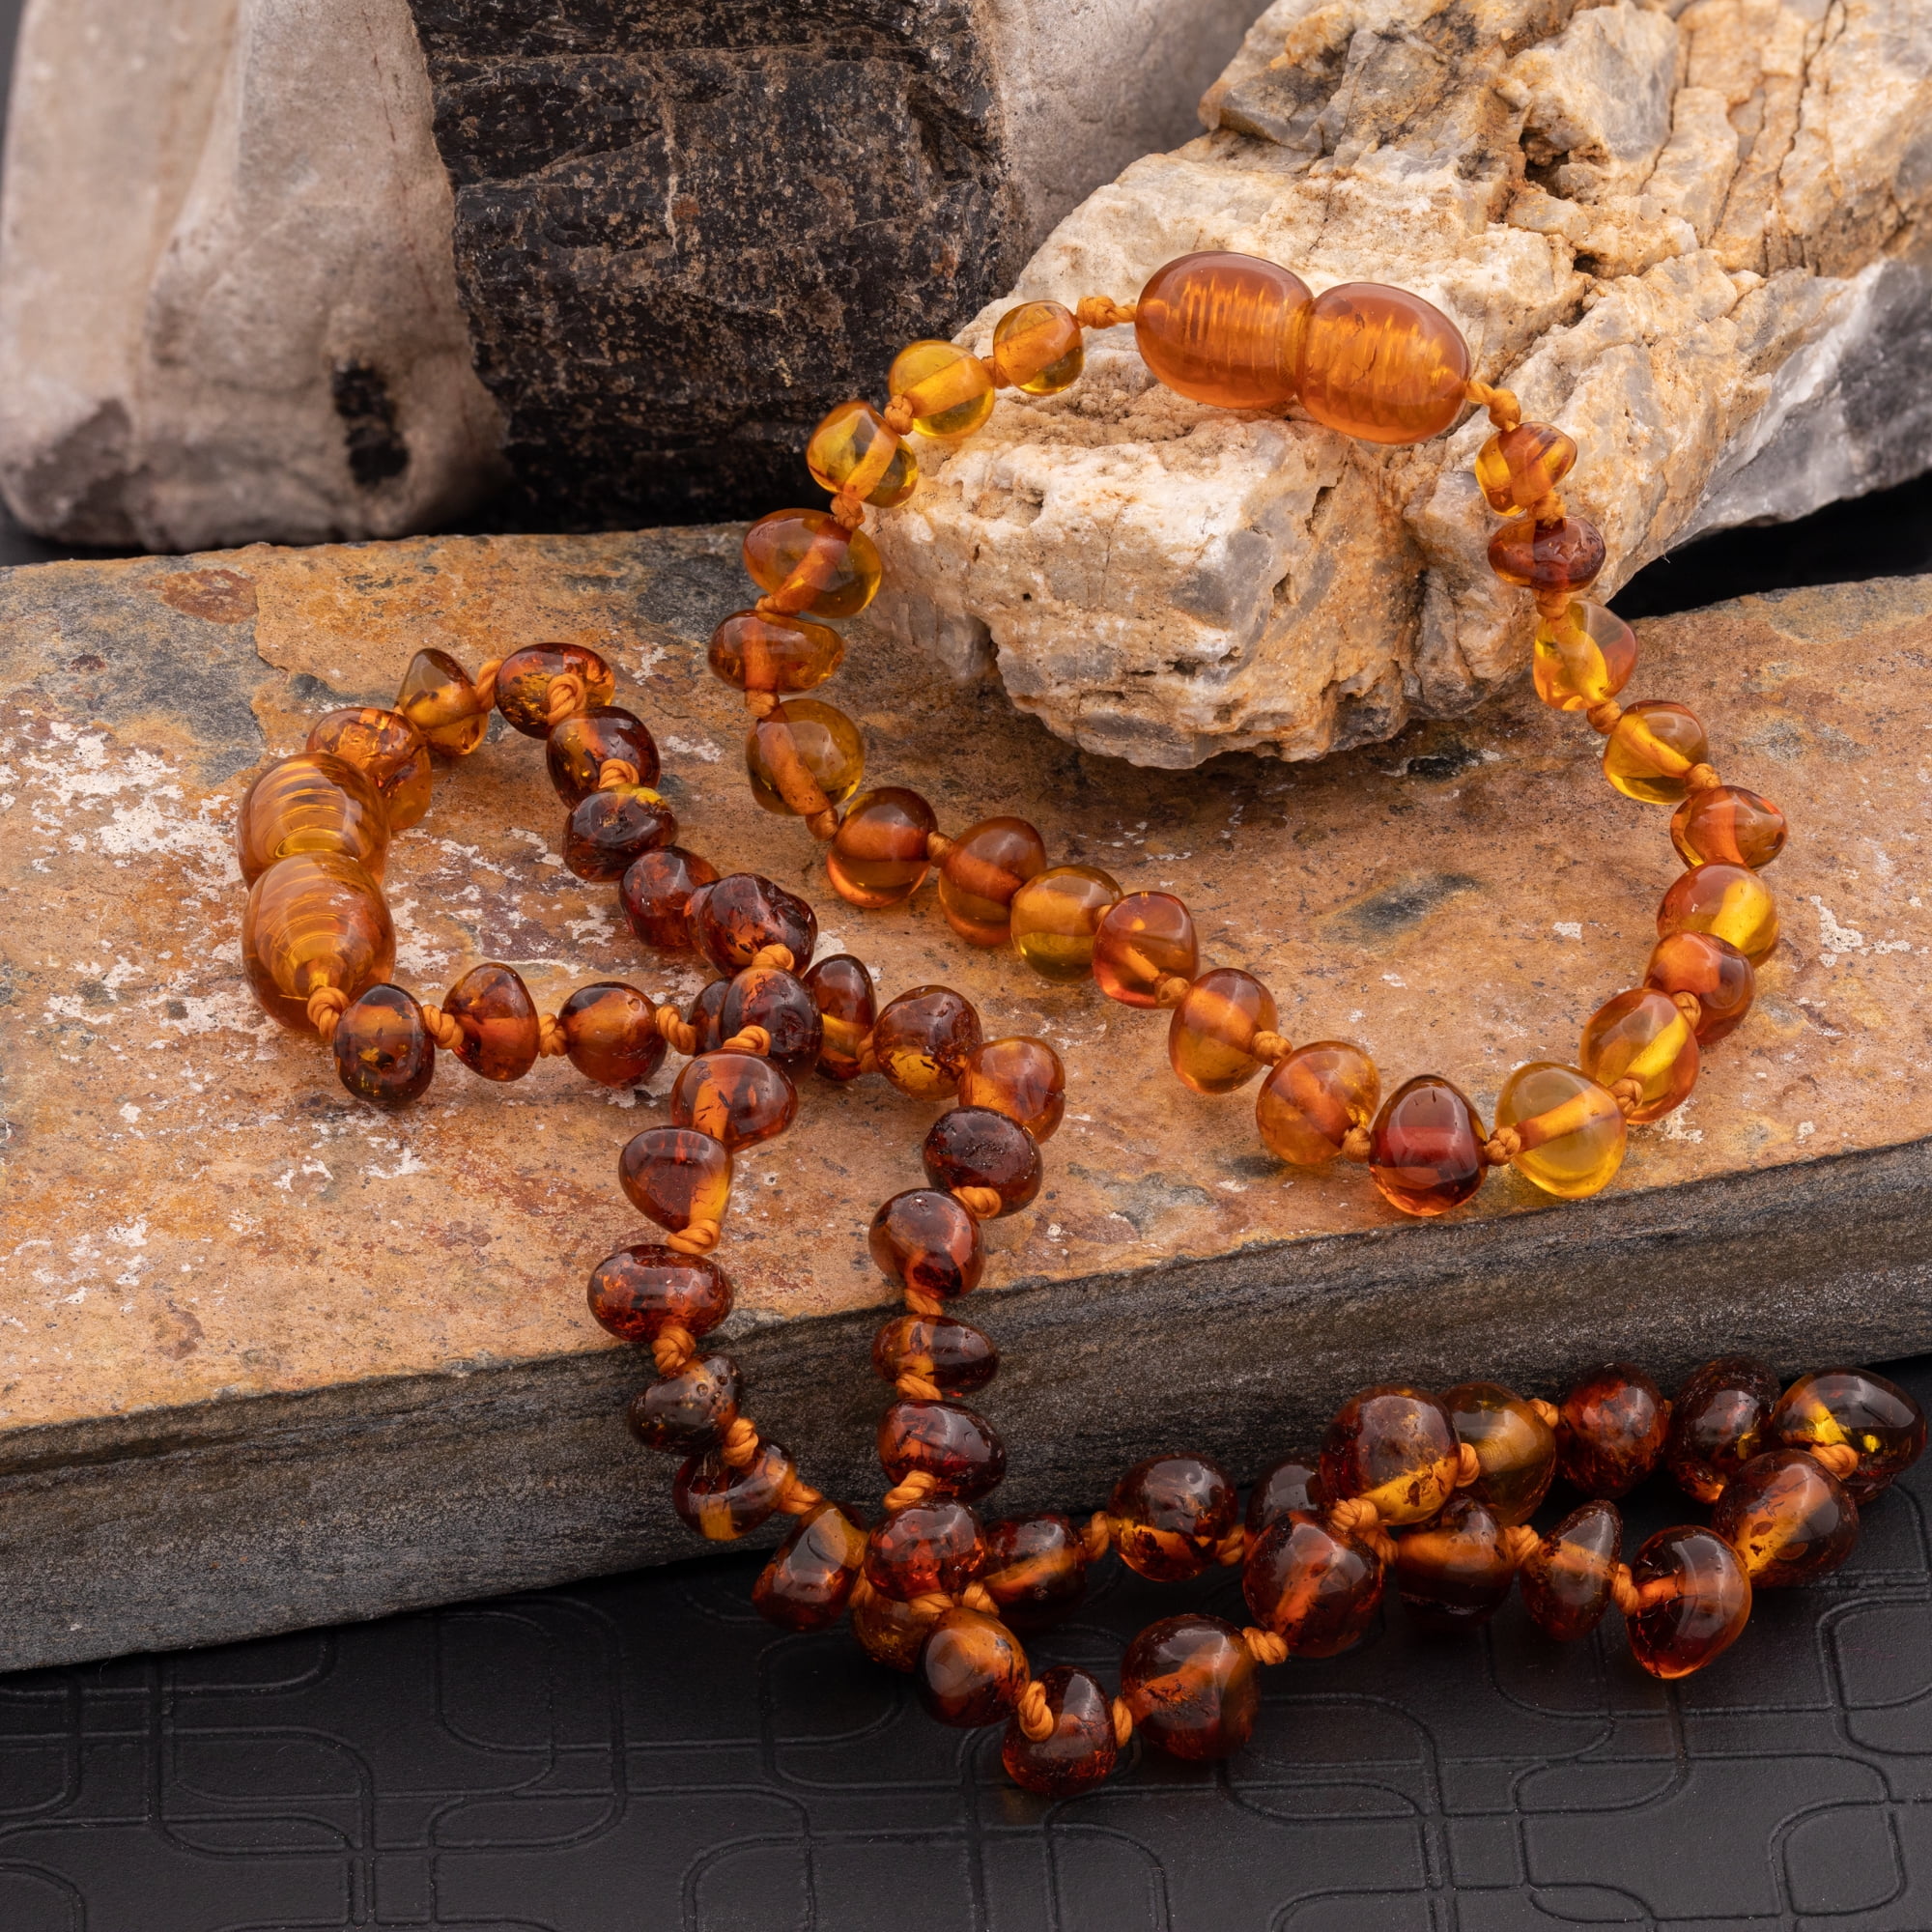 Baltic amber bracelet with inserts